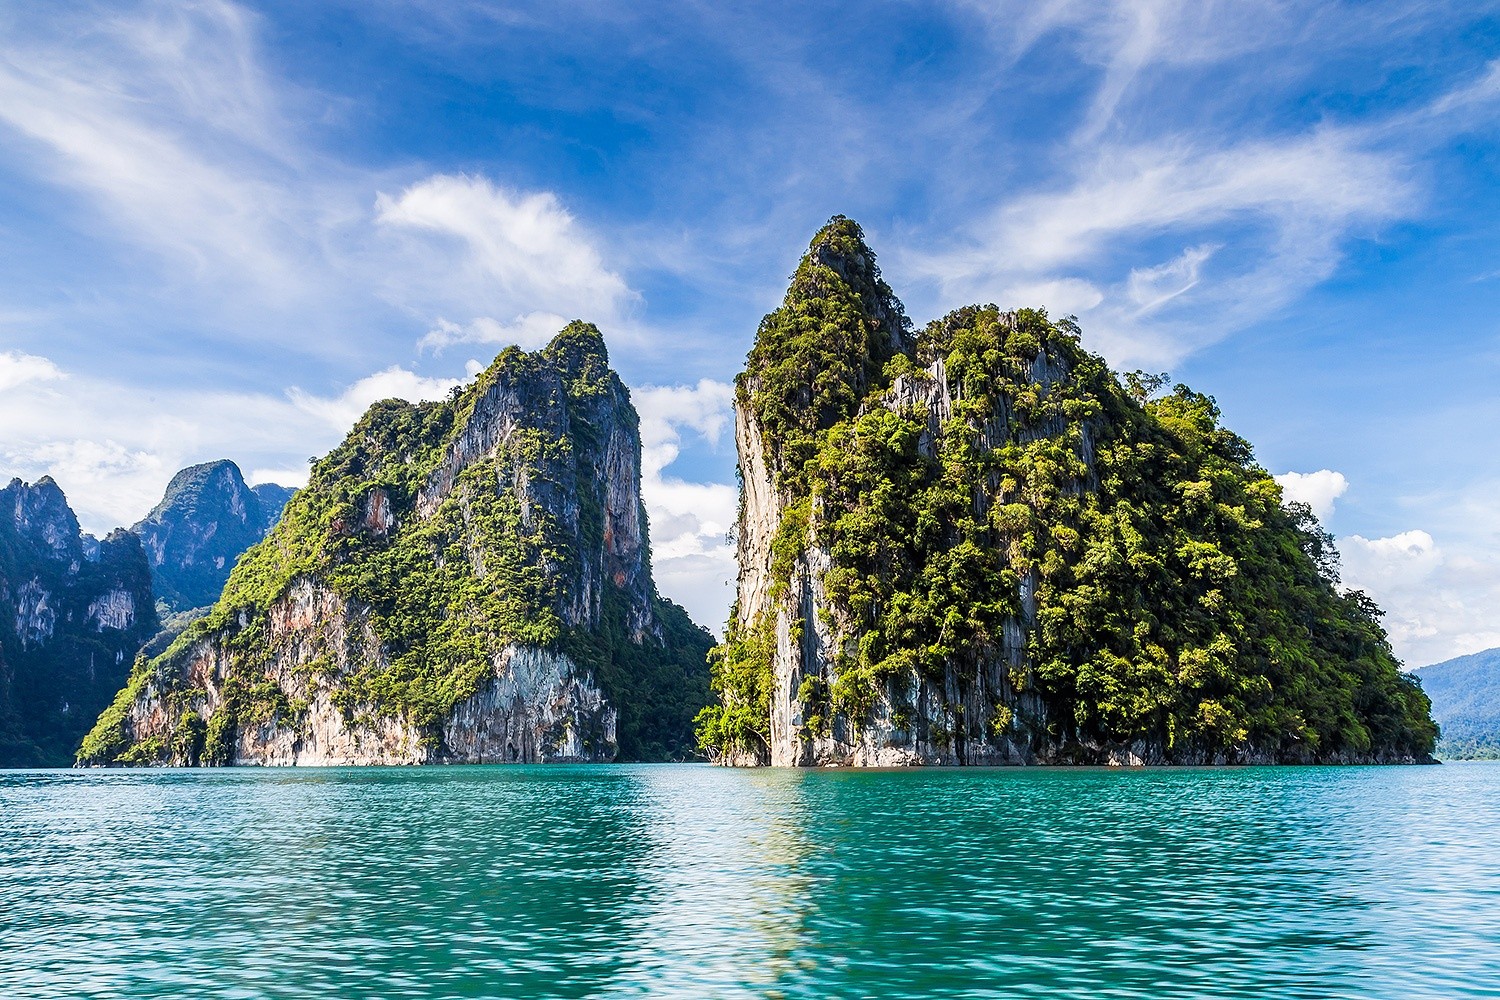 Island Limestone Sea Turquoise Water Tropical Thailand Clouds Cliff Mountains Nature Landscape 1500x1000